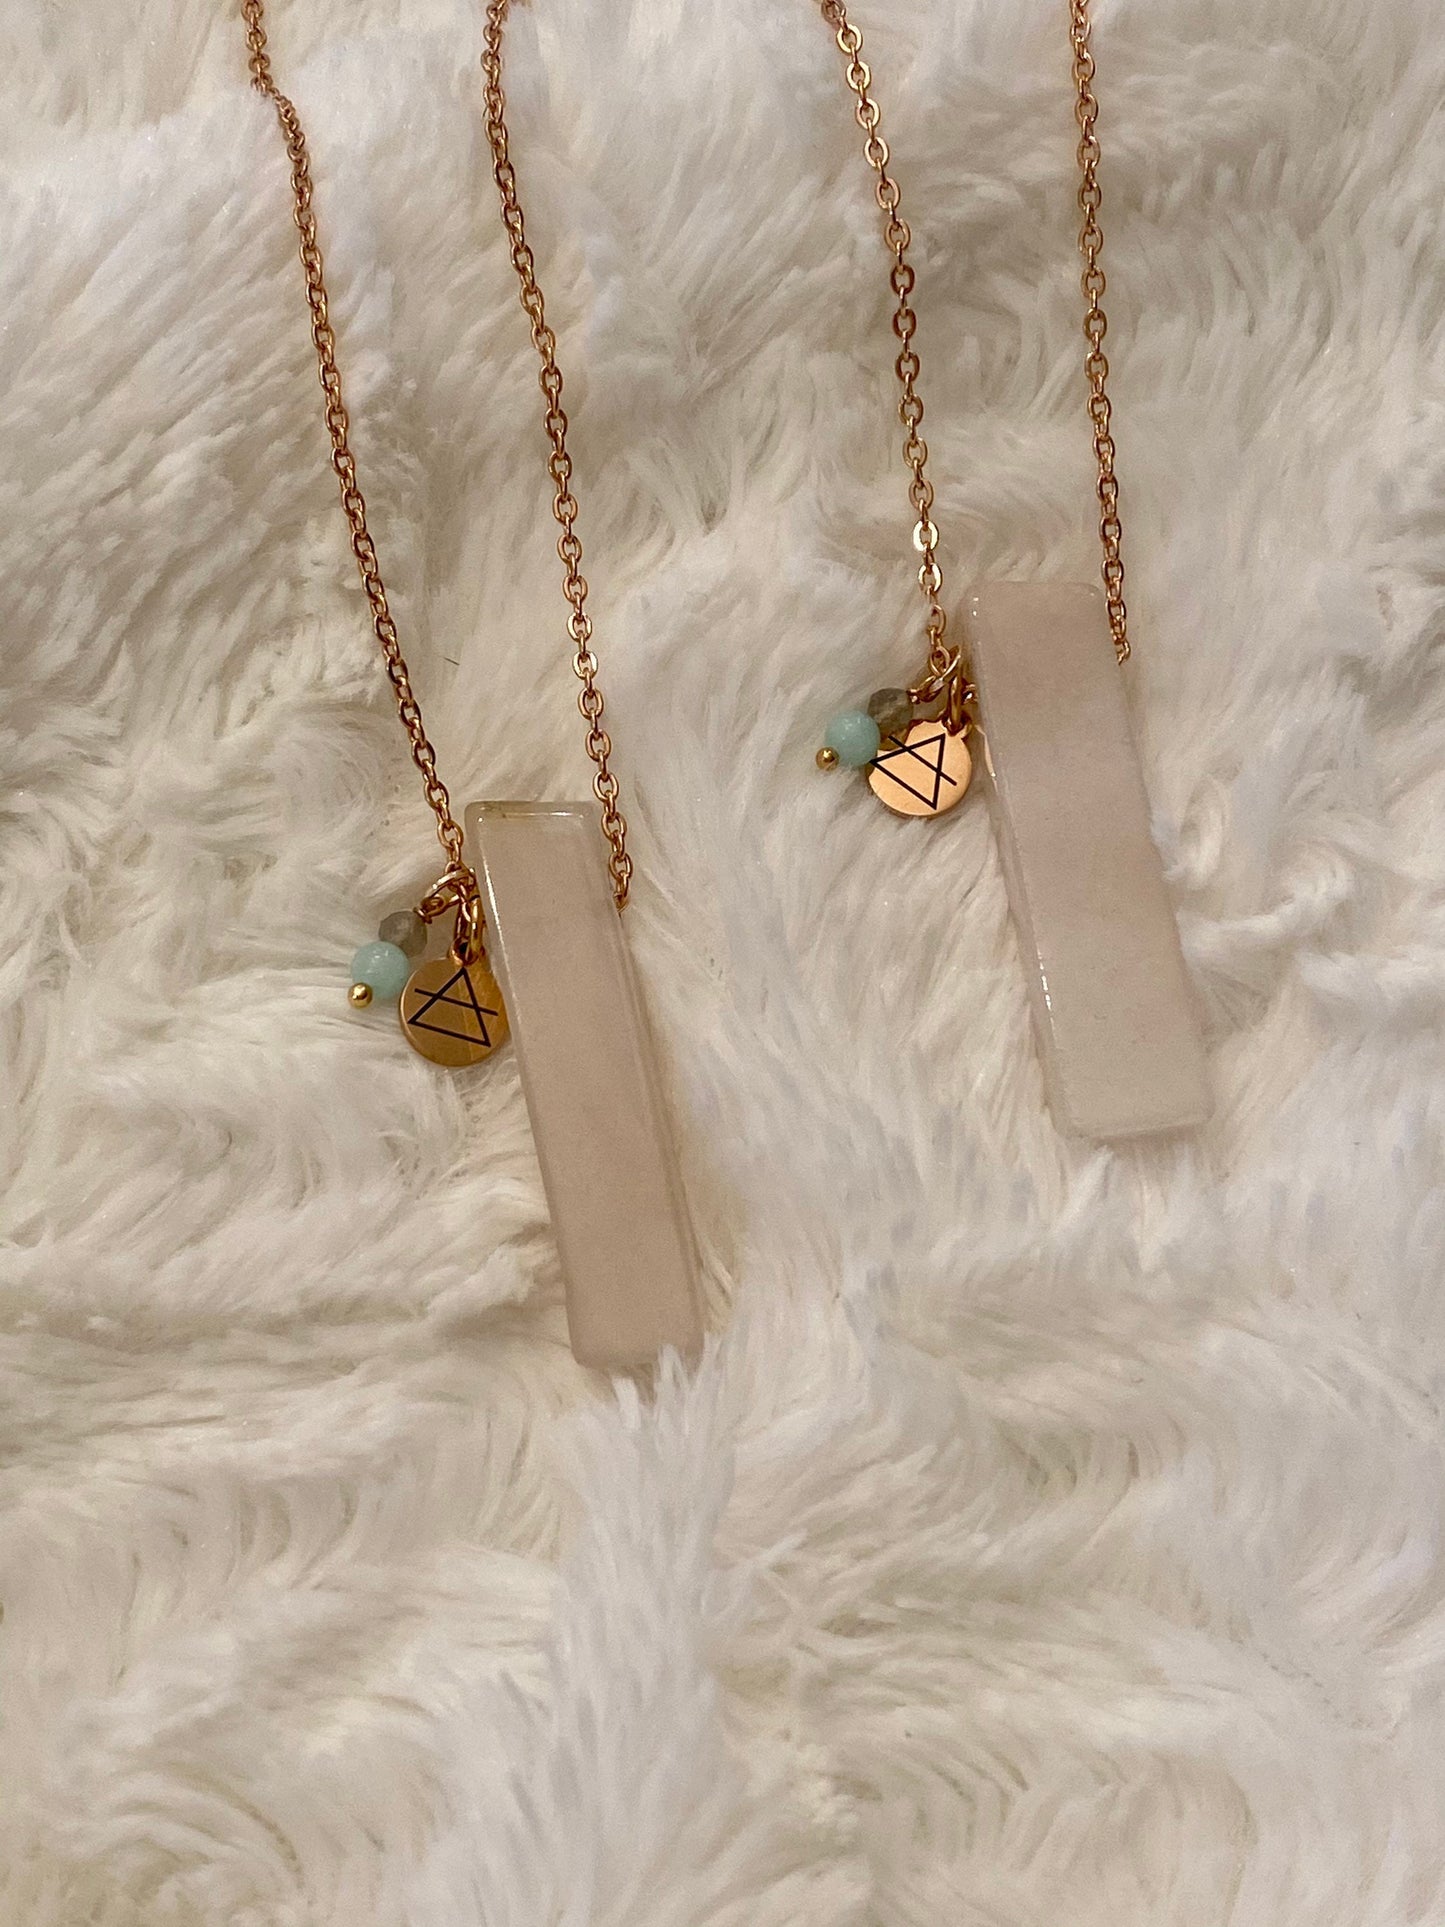 Long rose gold necklace, Natural stone crystal necklace, pink aventurine, raw stone, rectangular chip, semiprecious stone, healing energy